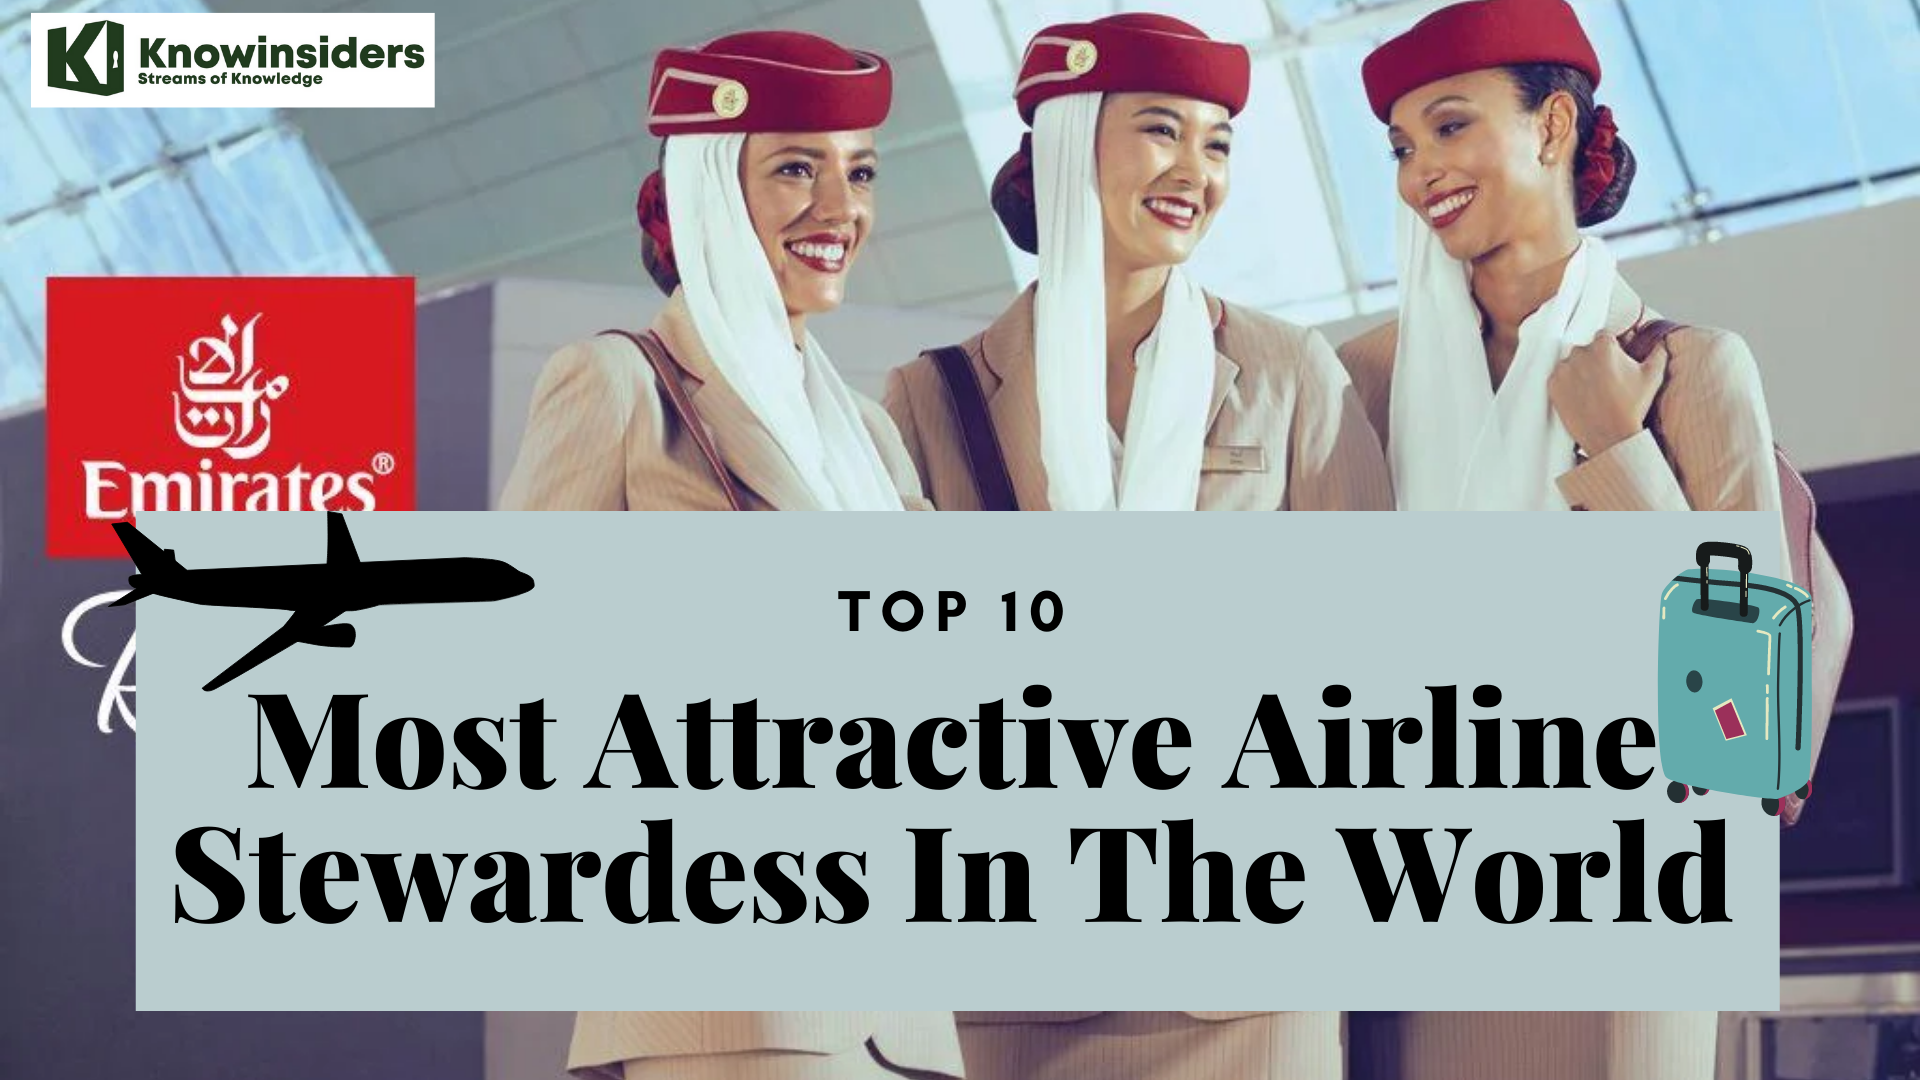 Top 10 most attractive stewardess in the world. Photo: Emirates